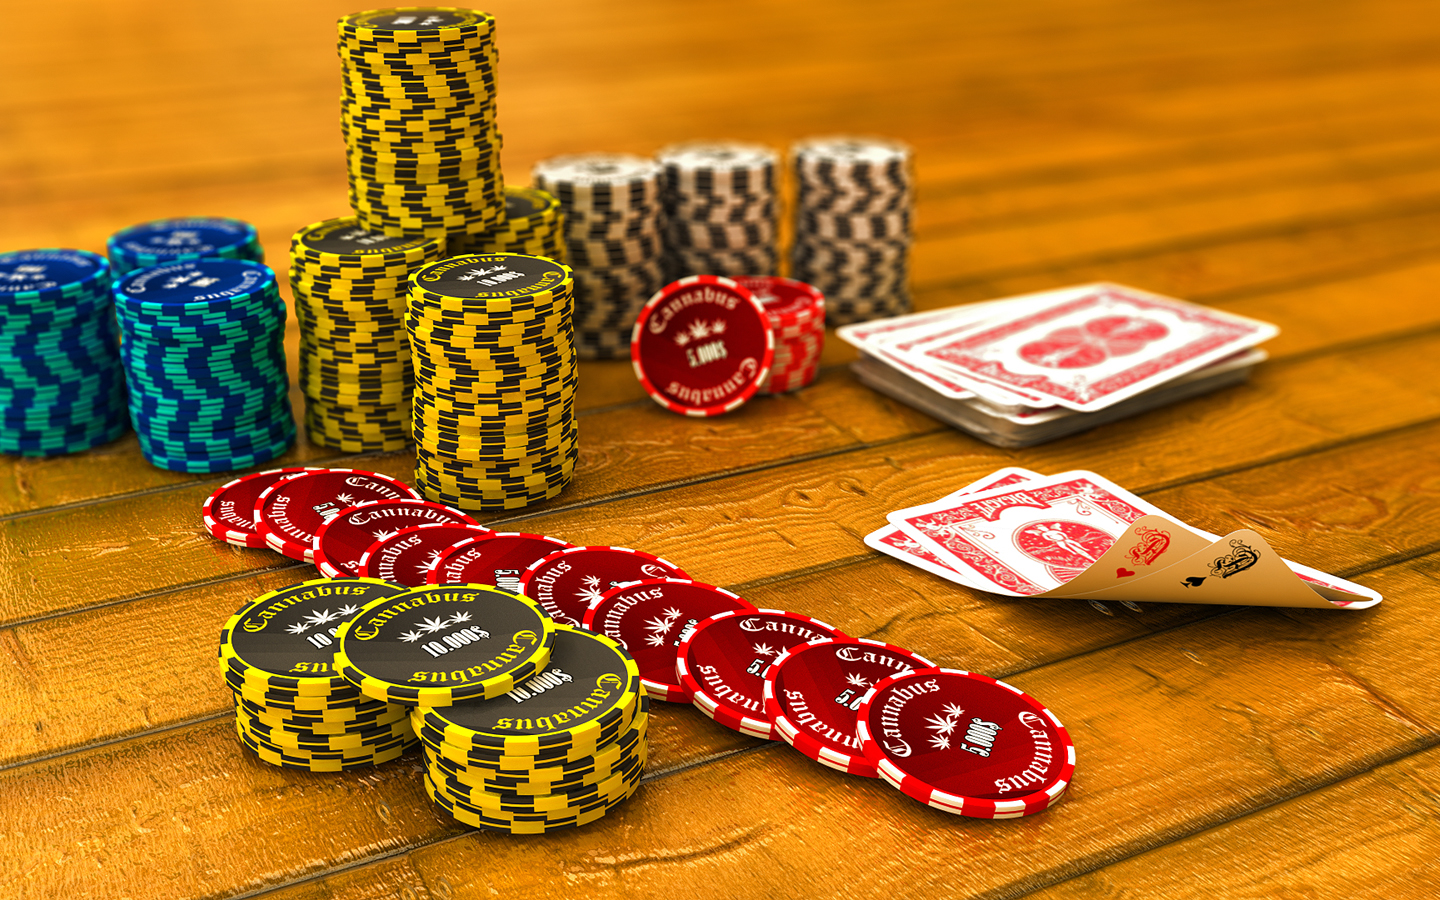 Poker Chips, also known as Casino Chips or Tokens